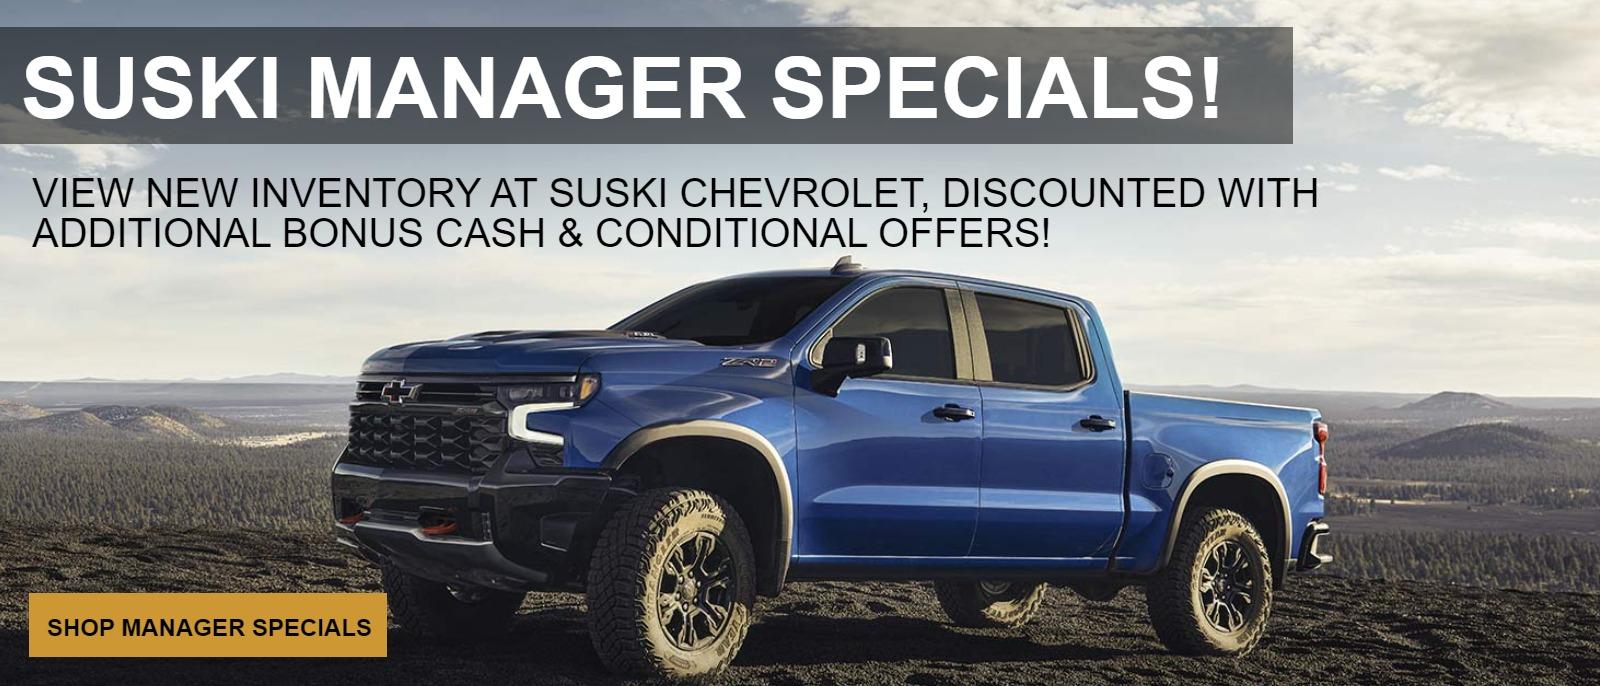 Suski Manager Specials!
View New inventory at Suski Chevrolet, discounted with additional bonus cash & conditional offers!
Call to Action: Shop Manager Specials